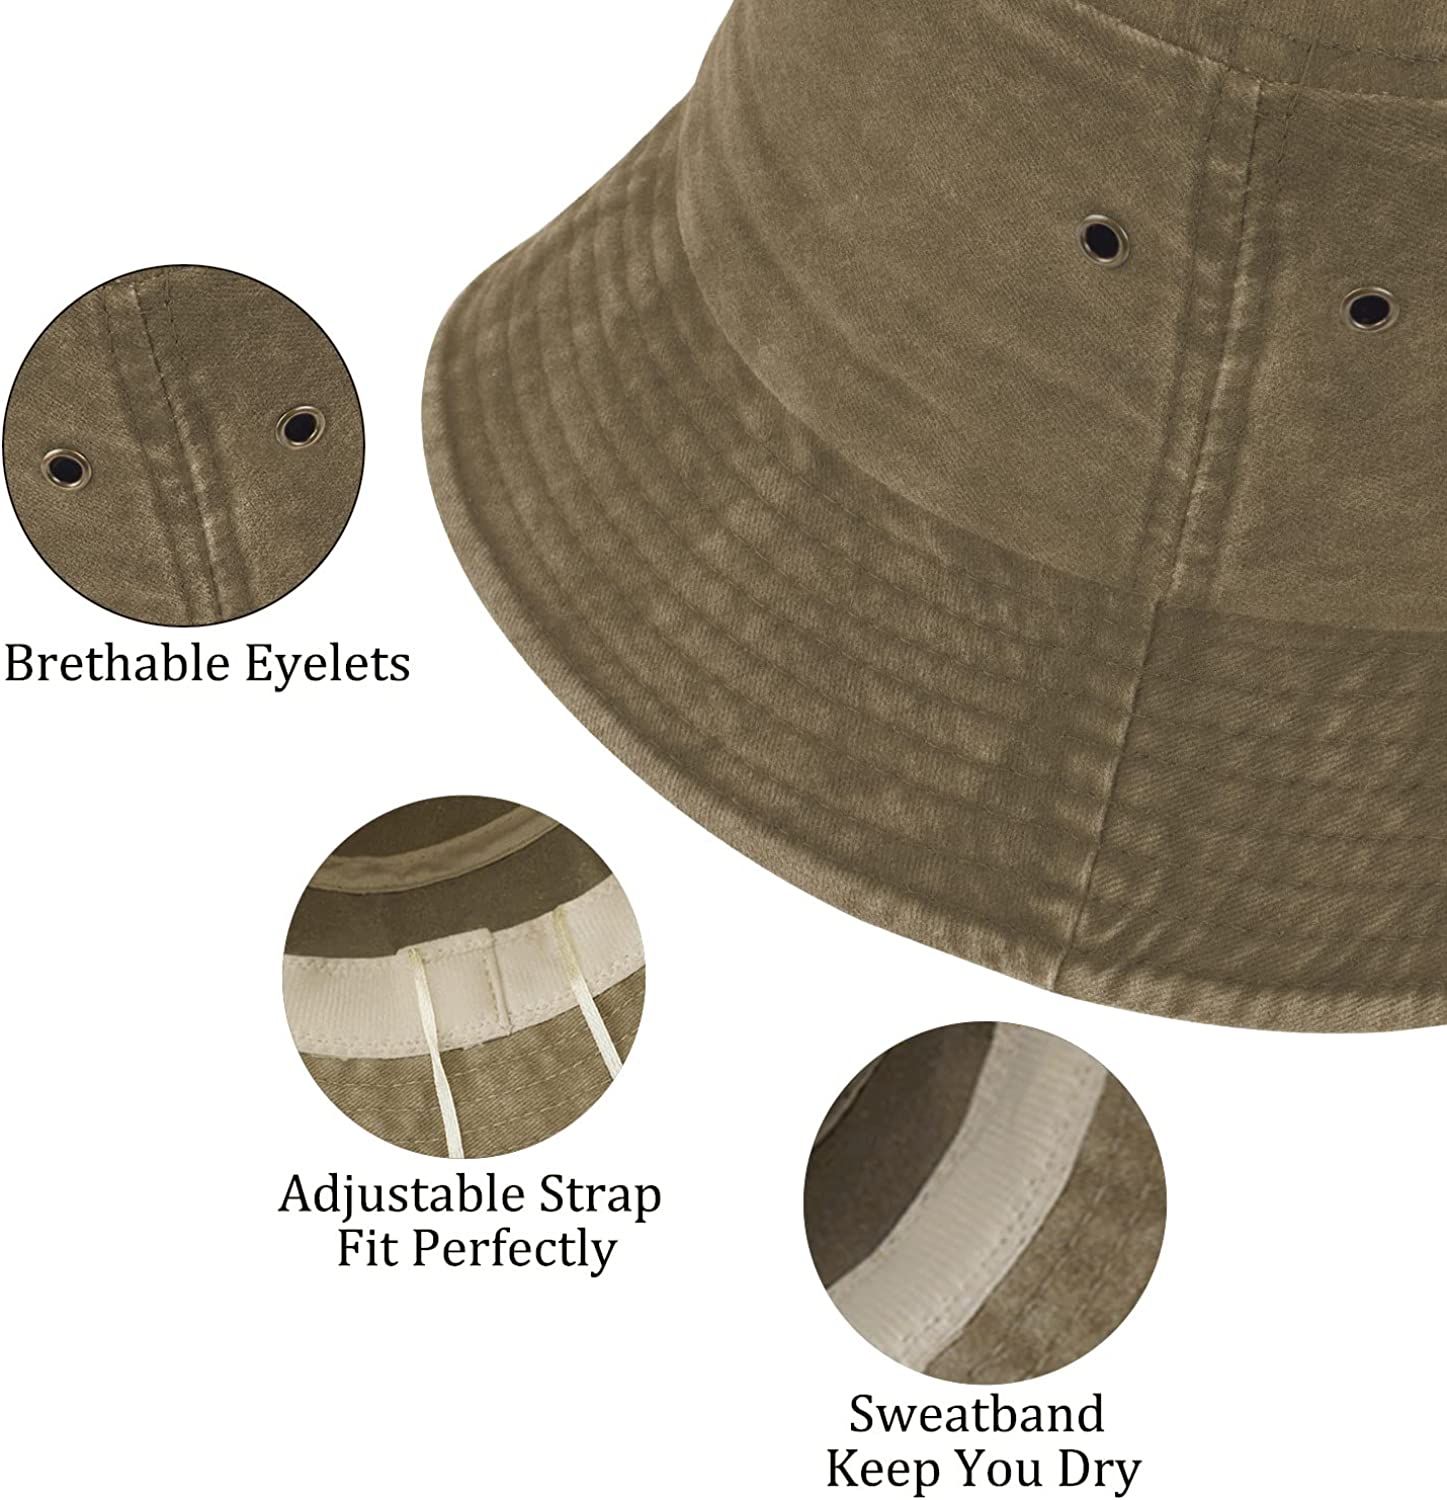 TOPONE ACCESSORIES LIMITED Custom Pigment Dyed Garment Washed Basic Fisherman Bucket Hat Topone Accessories Ltd. 